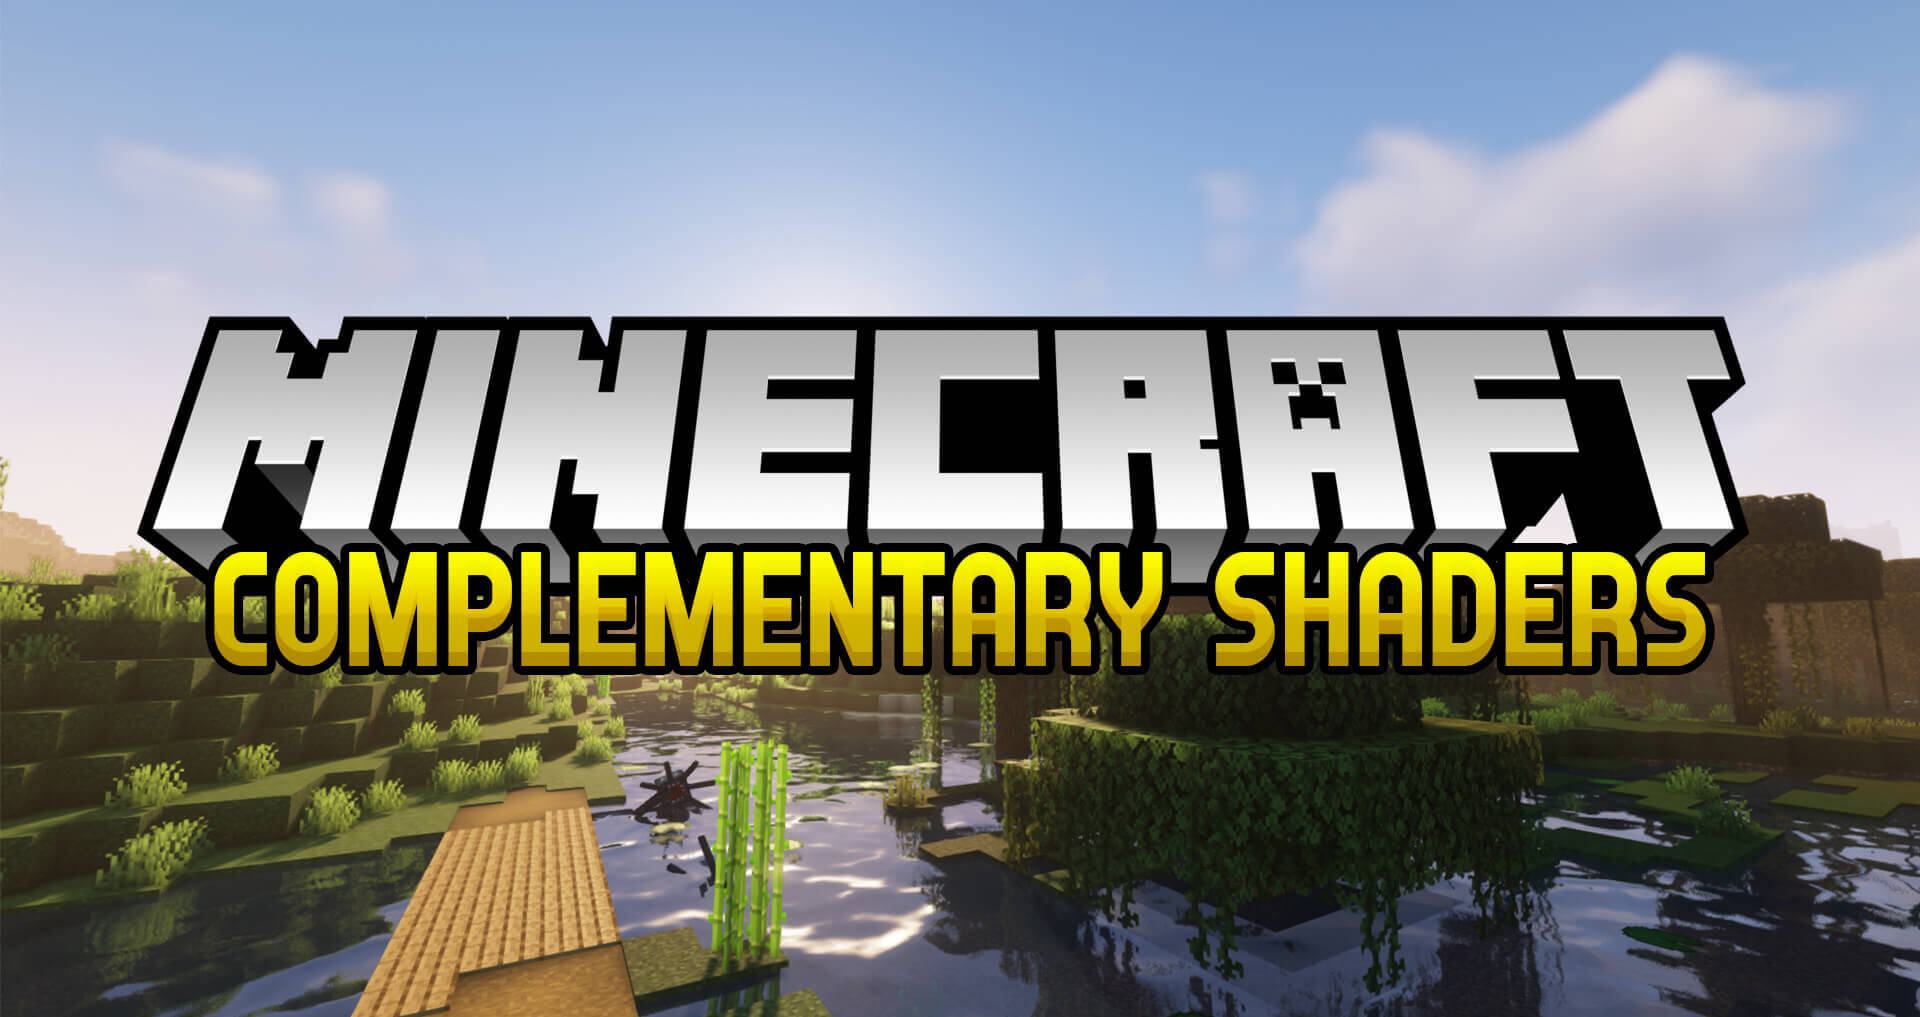 Complementary Shaders 1.17.1 → 1.7.10 • Download Shader Pack for Minecraft